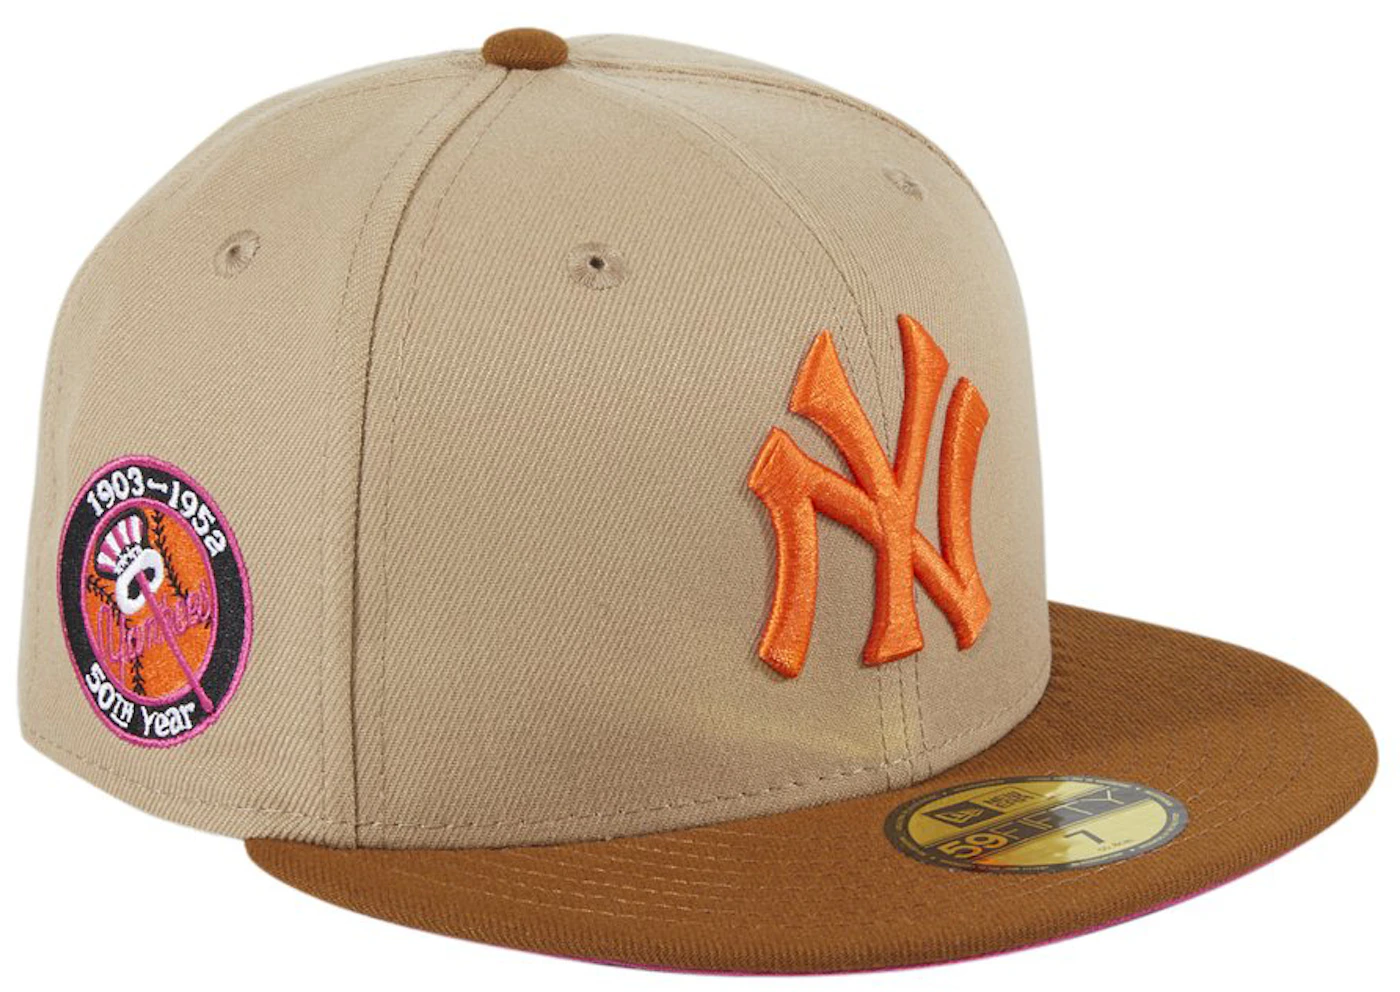 New York Yankees New Era x Felt 59FIFTY Fitted Hat - Brown